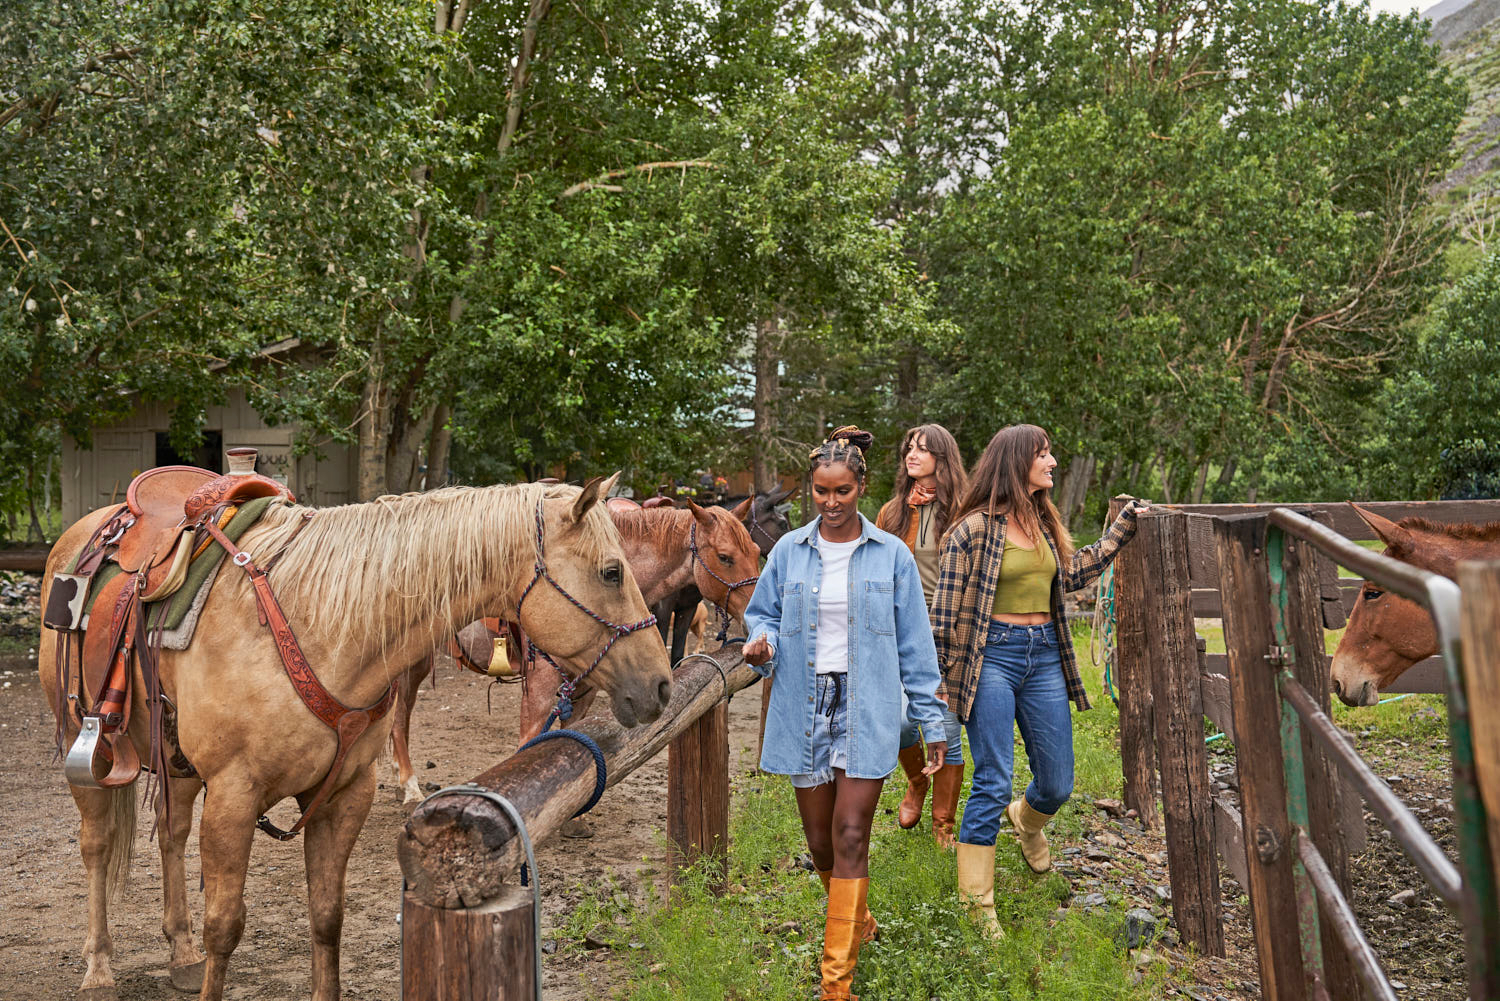 Knoxy_Knox_Lifestyle Photographer_Outbound Hotels_Summer_Mixed Race Friends_Horses_Adventure_01793.jpg